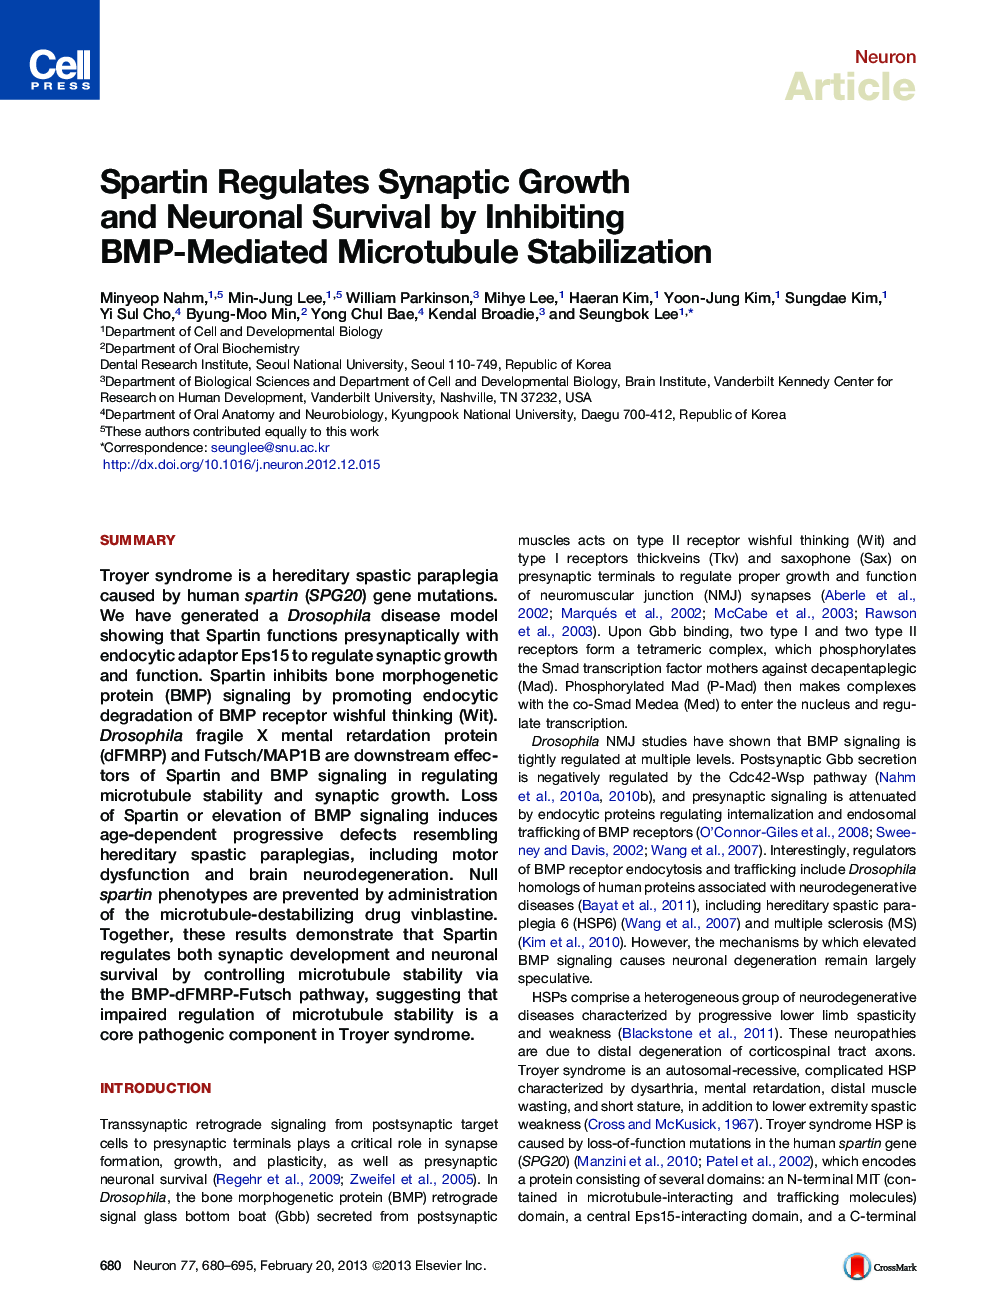 Spartin Regulates Synaptic Growth and Neuronal Survival by Inhibiting BMP-Mediated Microtubule Stabilization